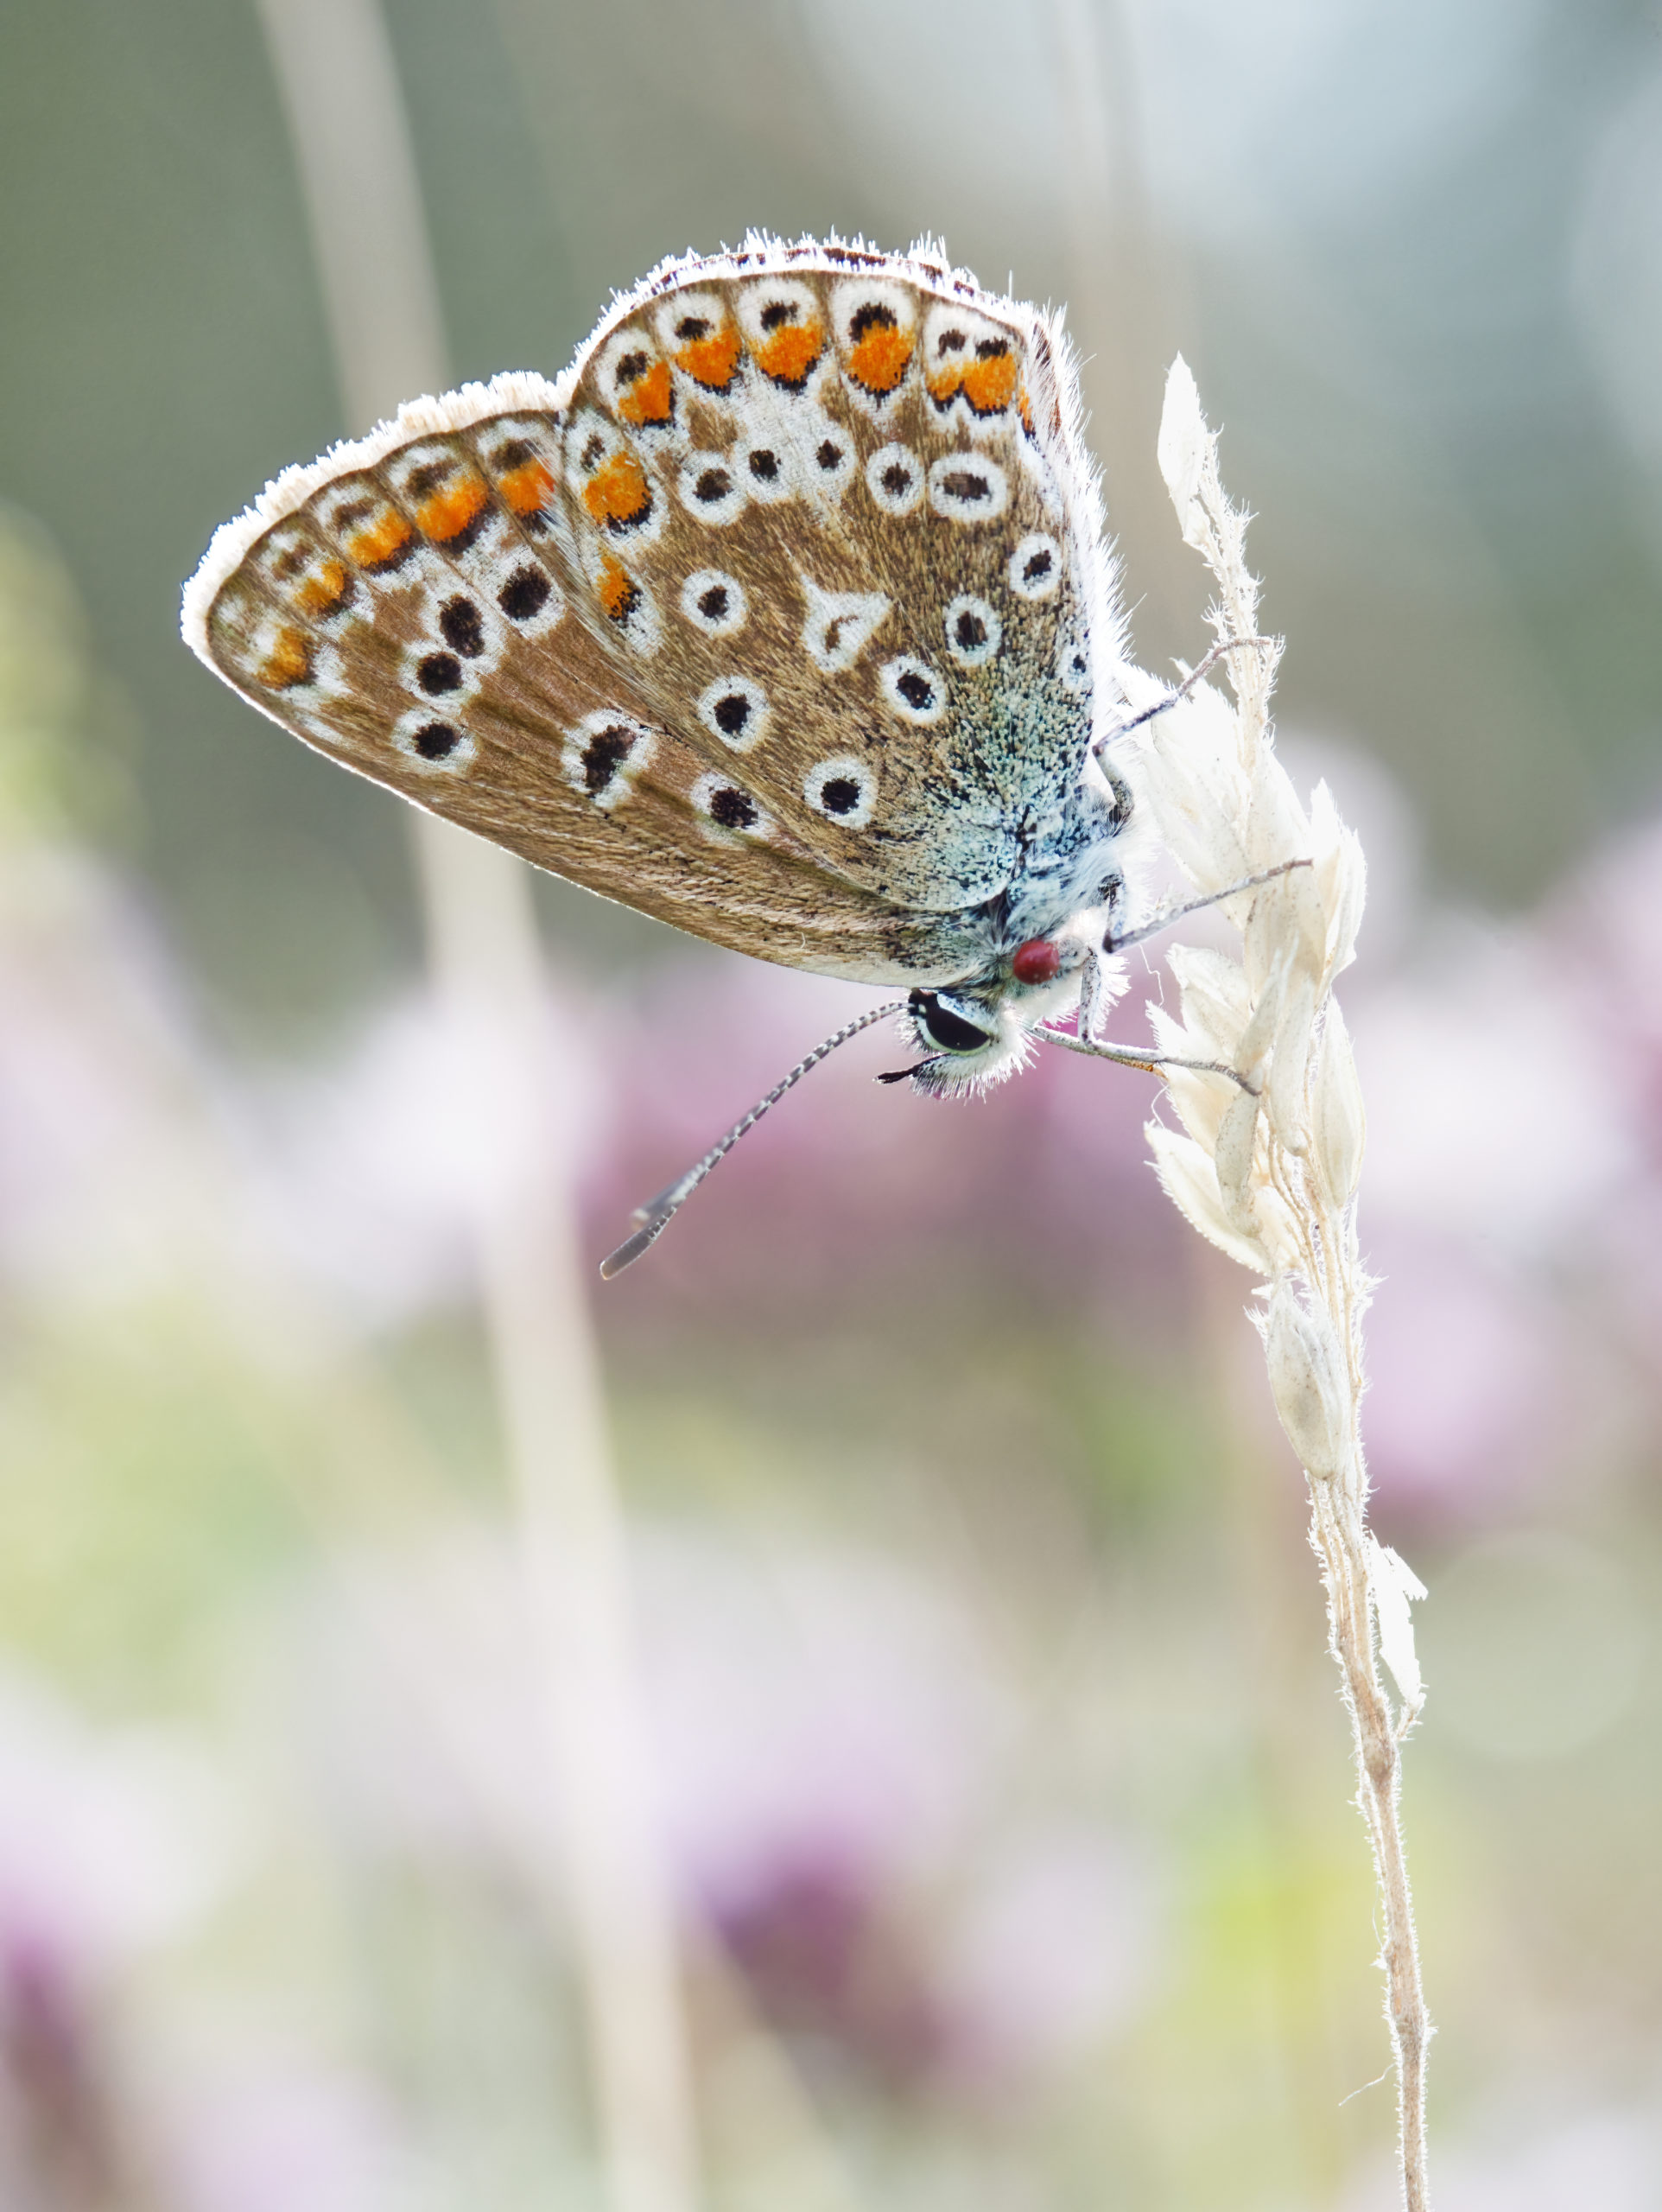 Common Blue butterfly, Polyommatus icarus, on a stalk of grass